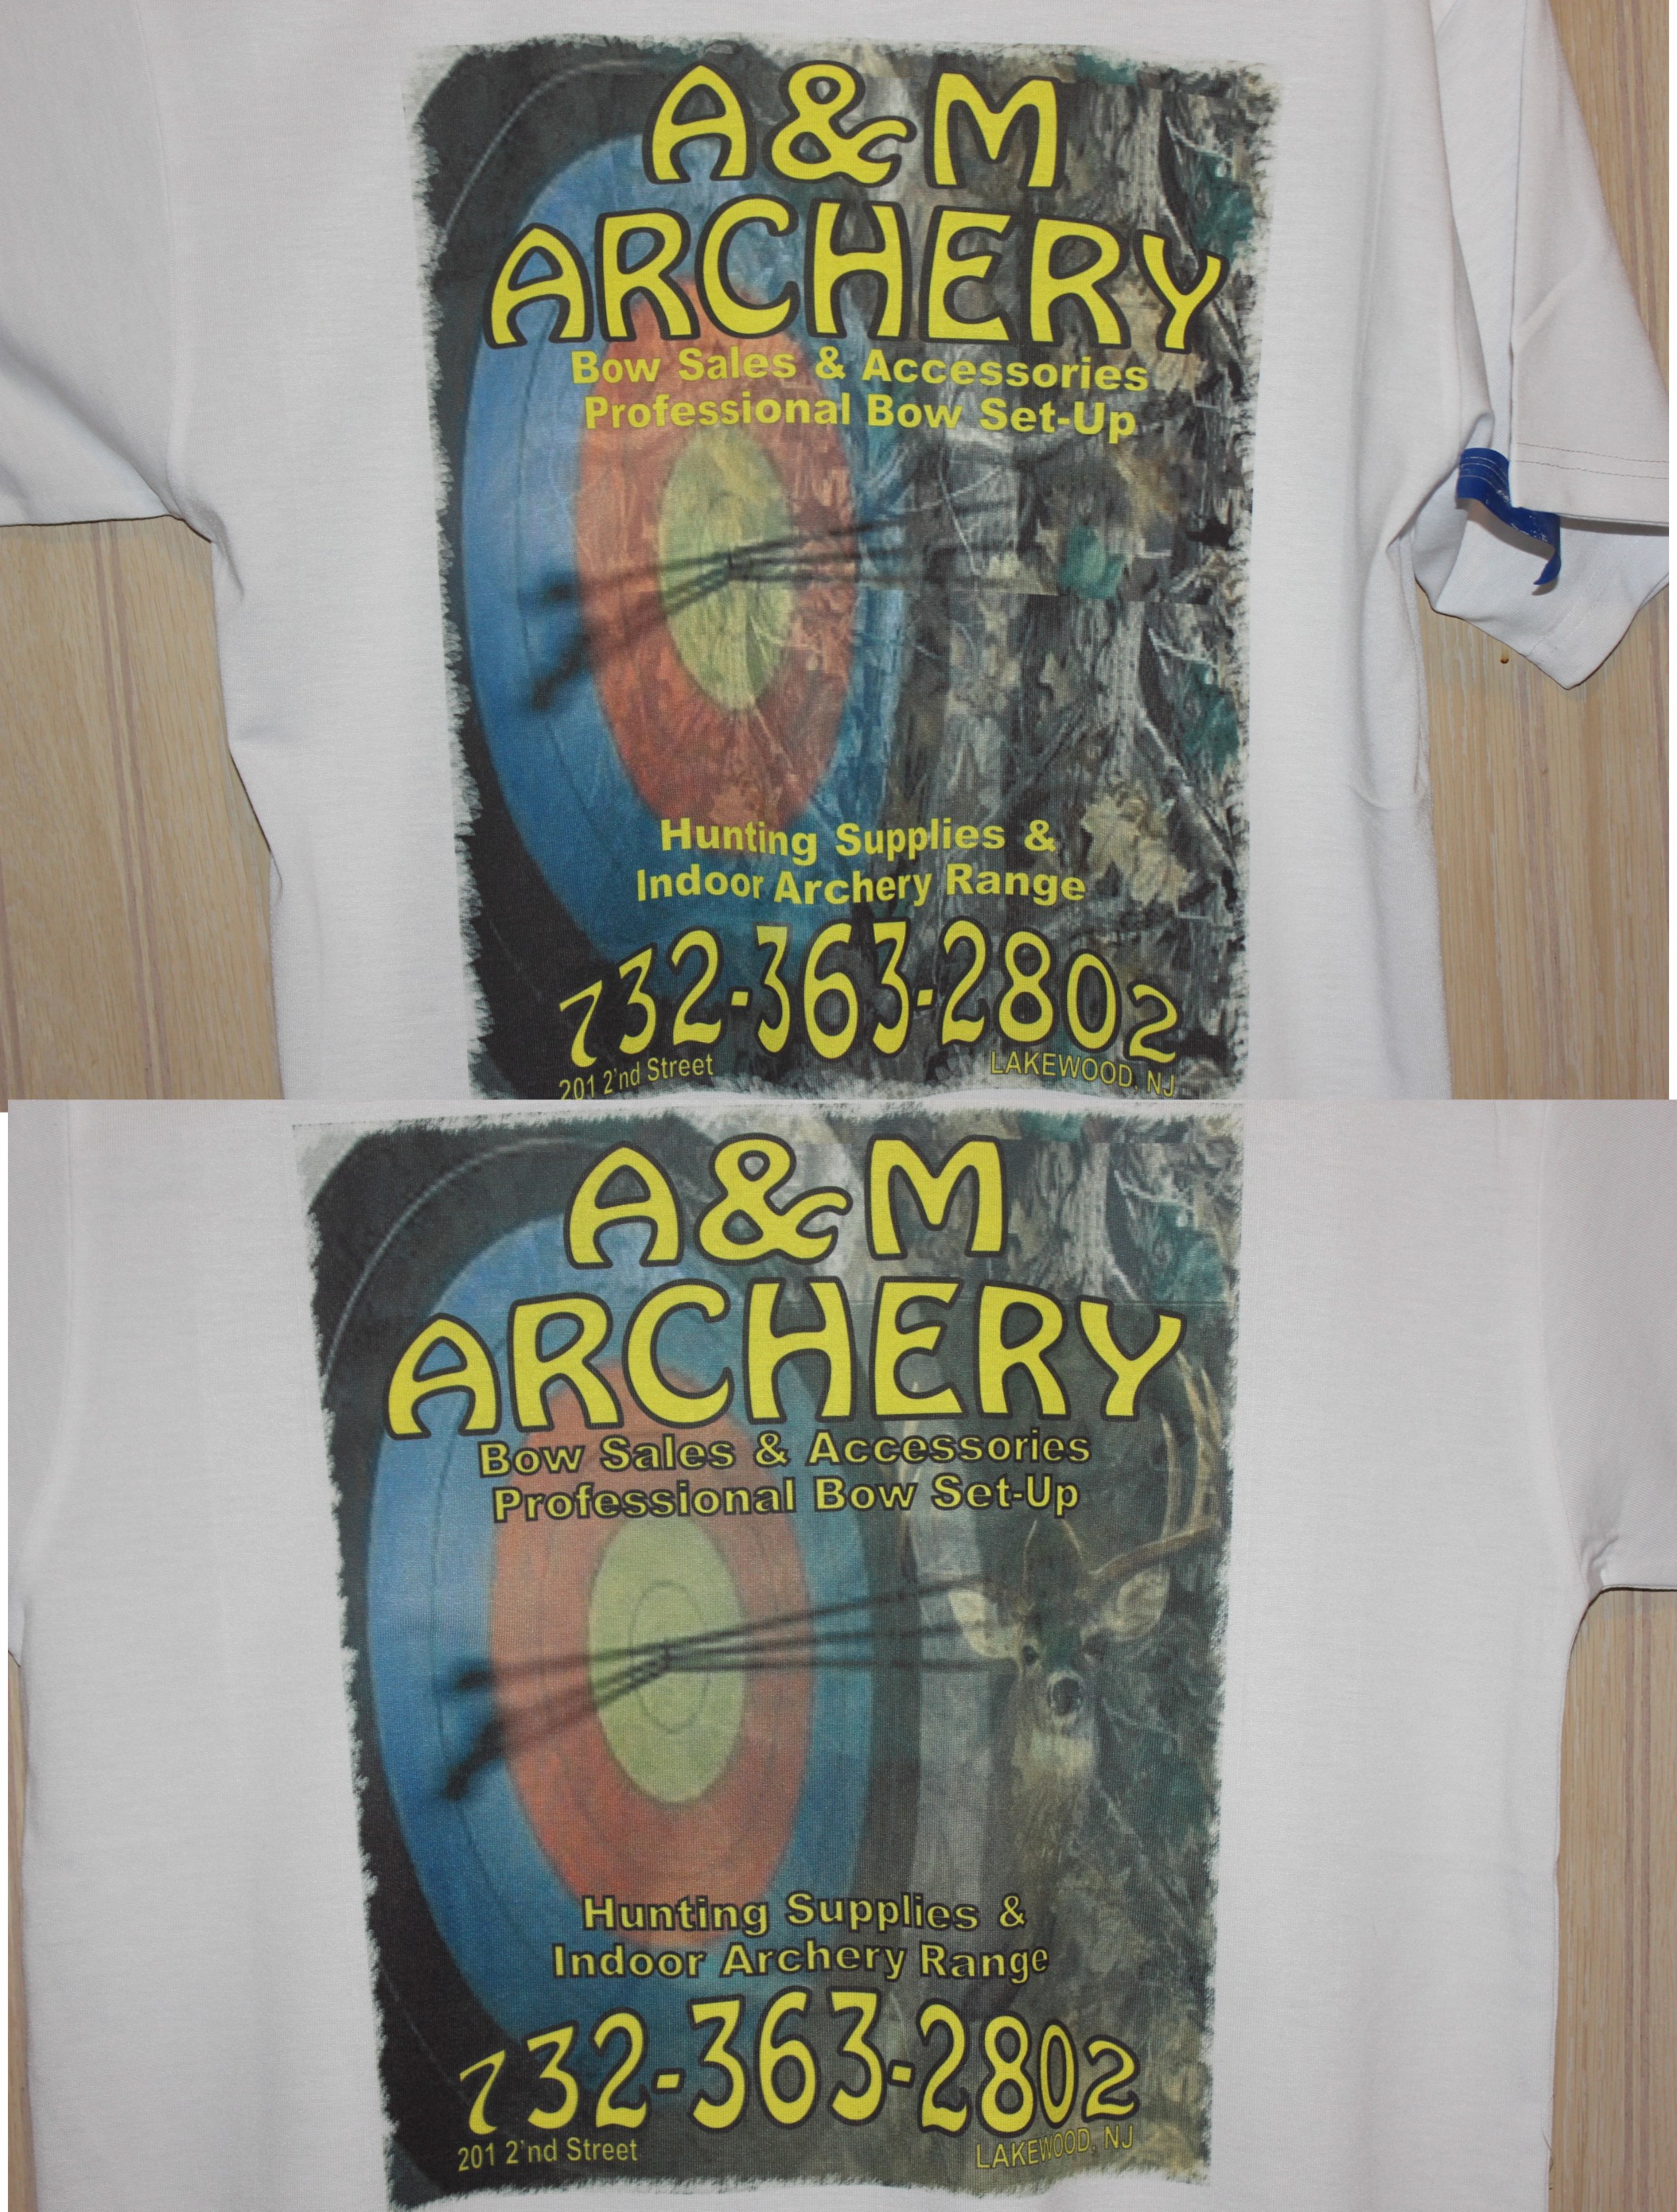 shirts made with sublimation printing